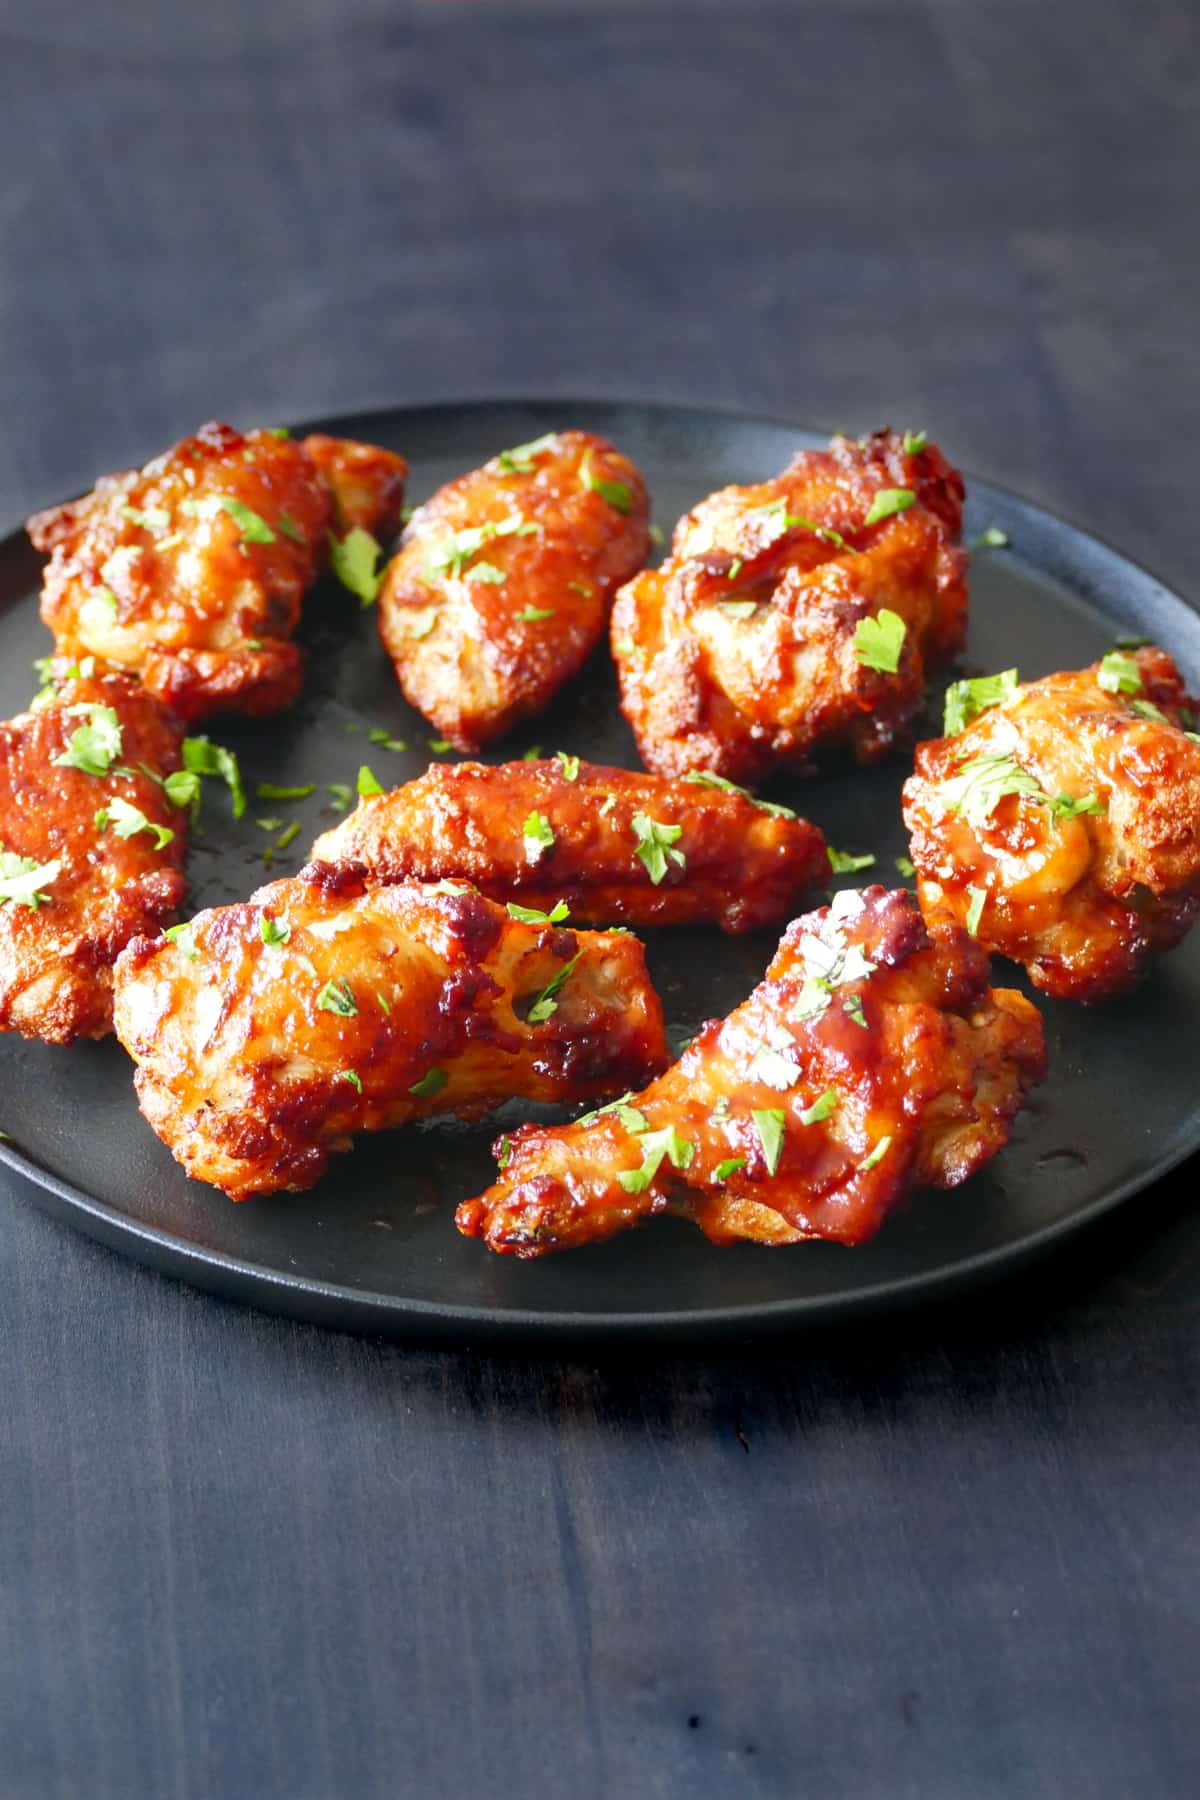 Air fryer frozen chicken wings  -Cooked chicken wings on black plate garnished with parsley